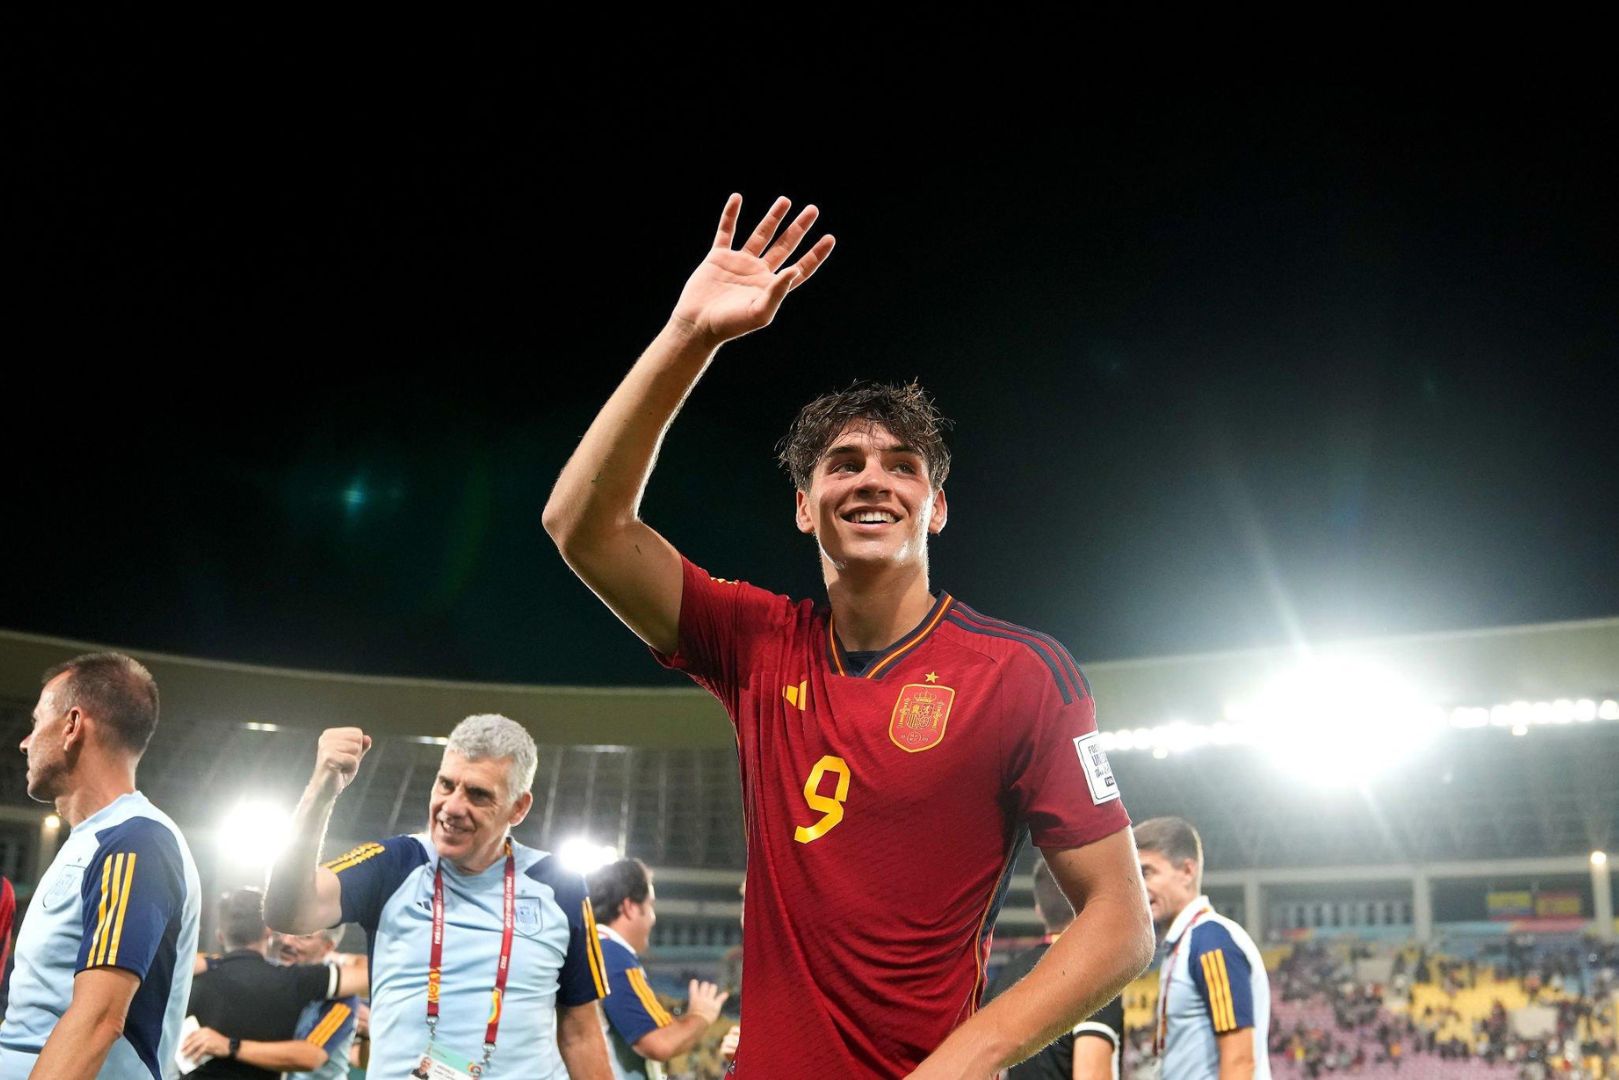 SURAKARTA, INDONESIA - NOVEMBER 20: Marc Guiu of Barcelona celebrates victory following the FIFA U-17 World Cup Round 16 match between Spain and Japan at Manahan Stadium on November 20, 2023 in Surakarta, Indonesia.